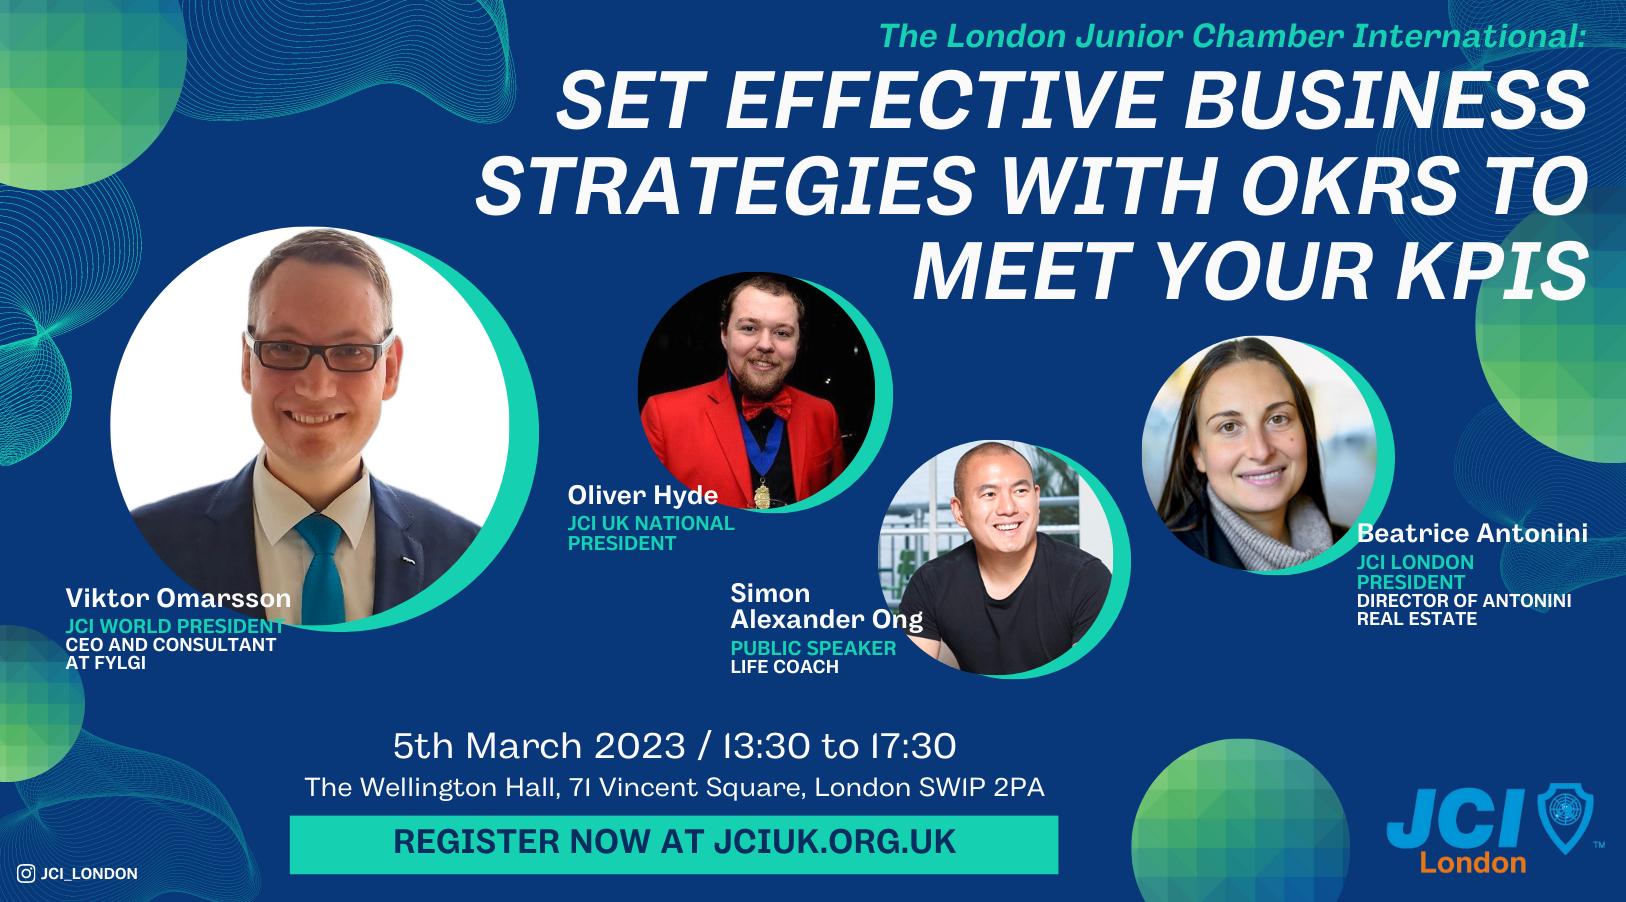 Set effective business strategies with OKRs to meet your KPIs